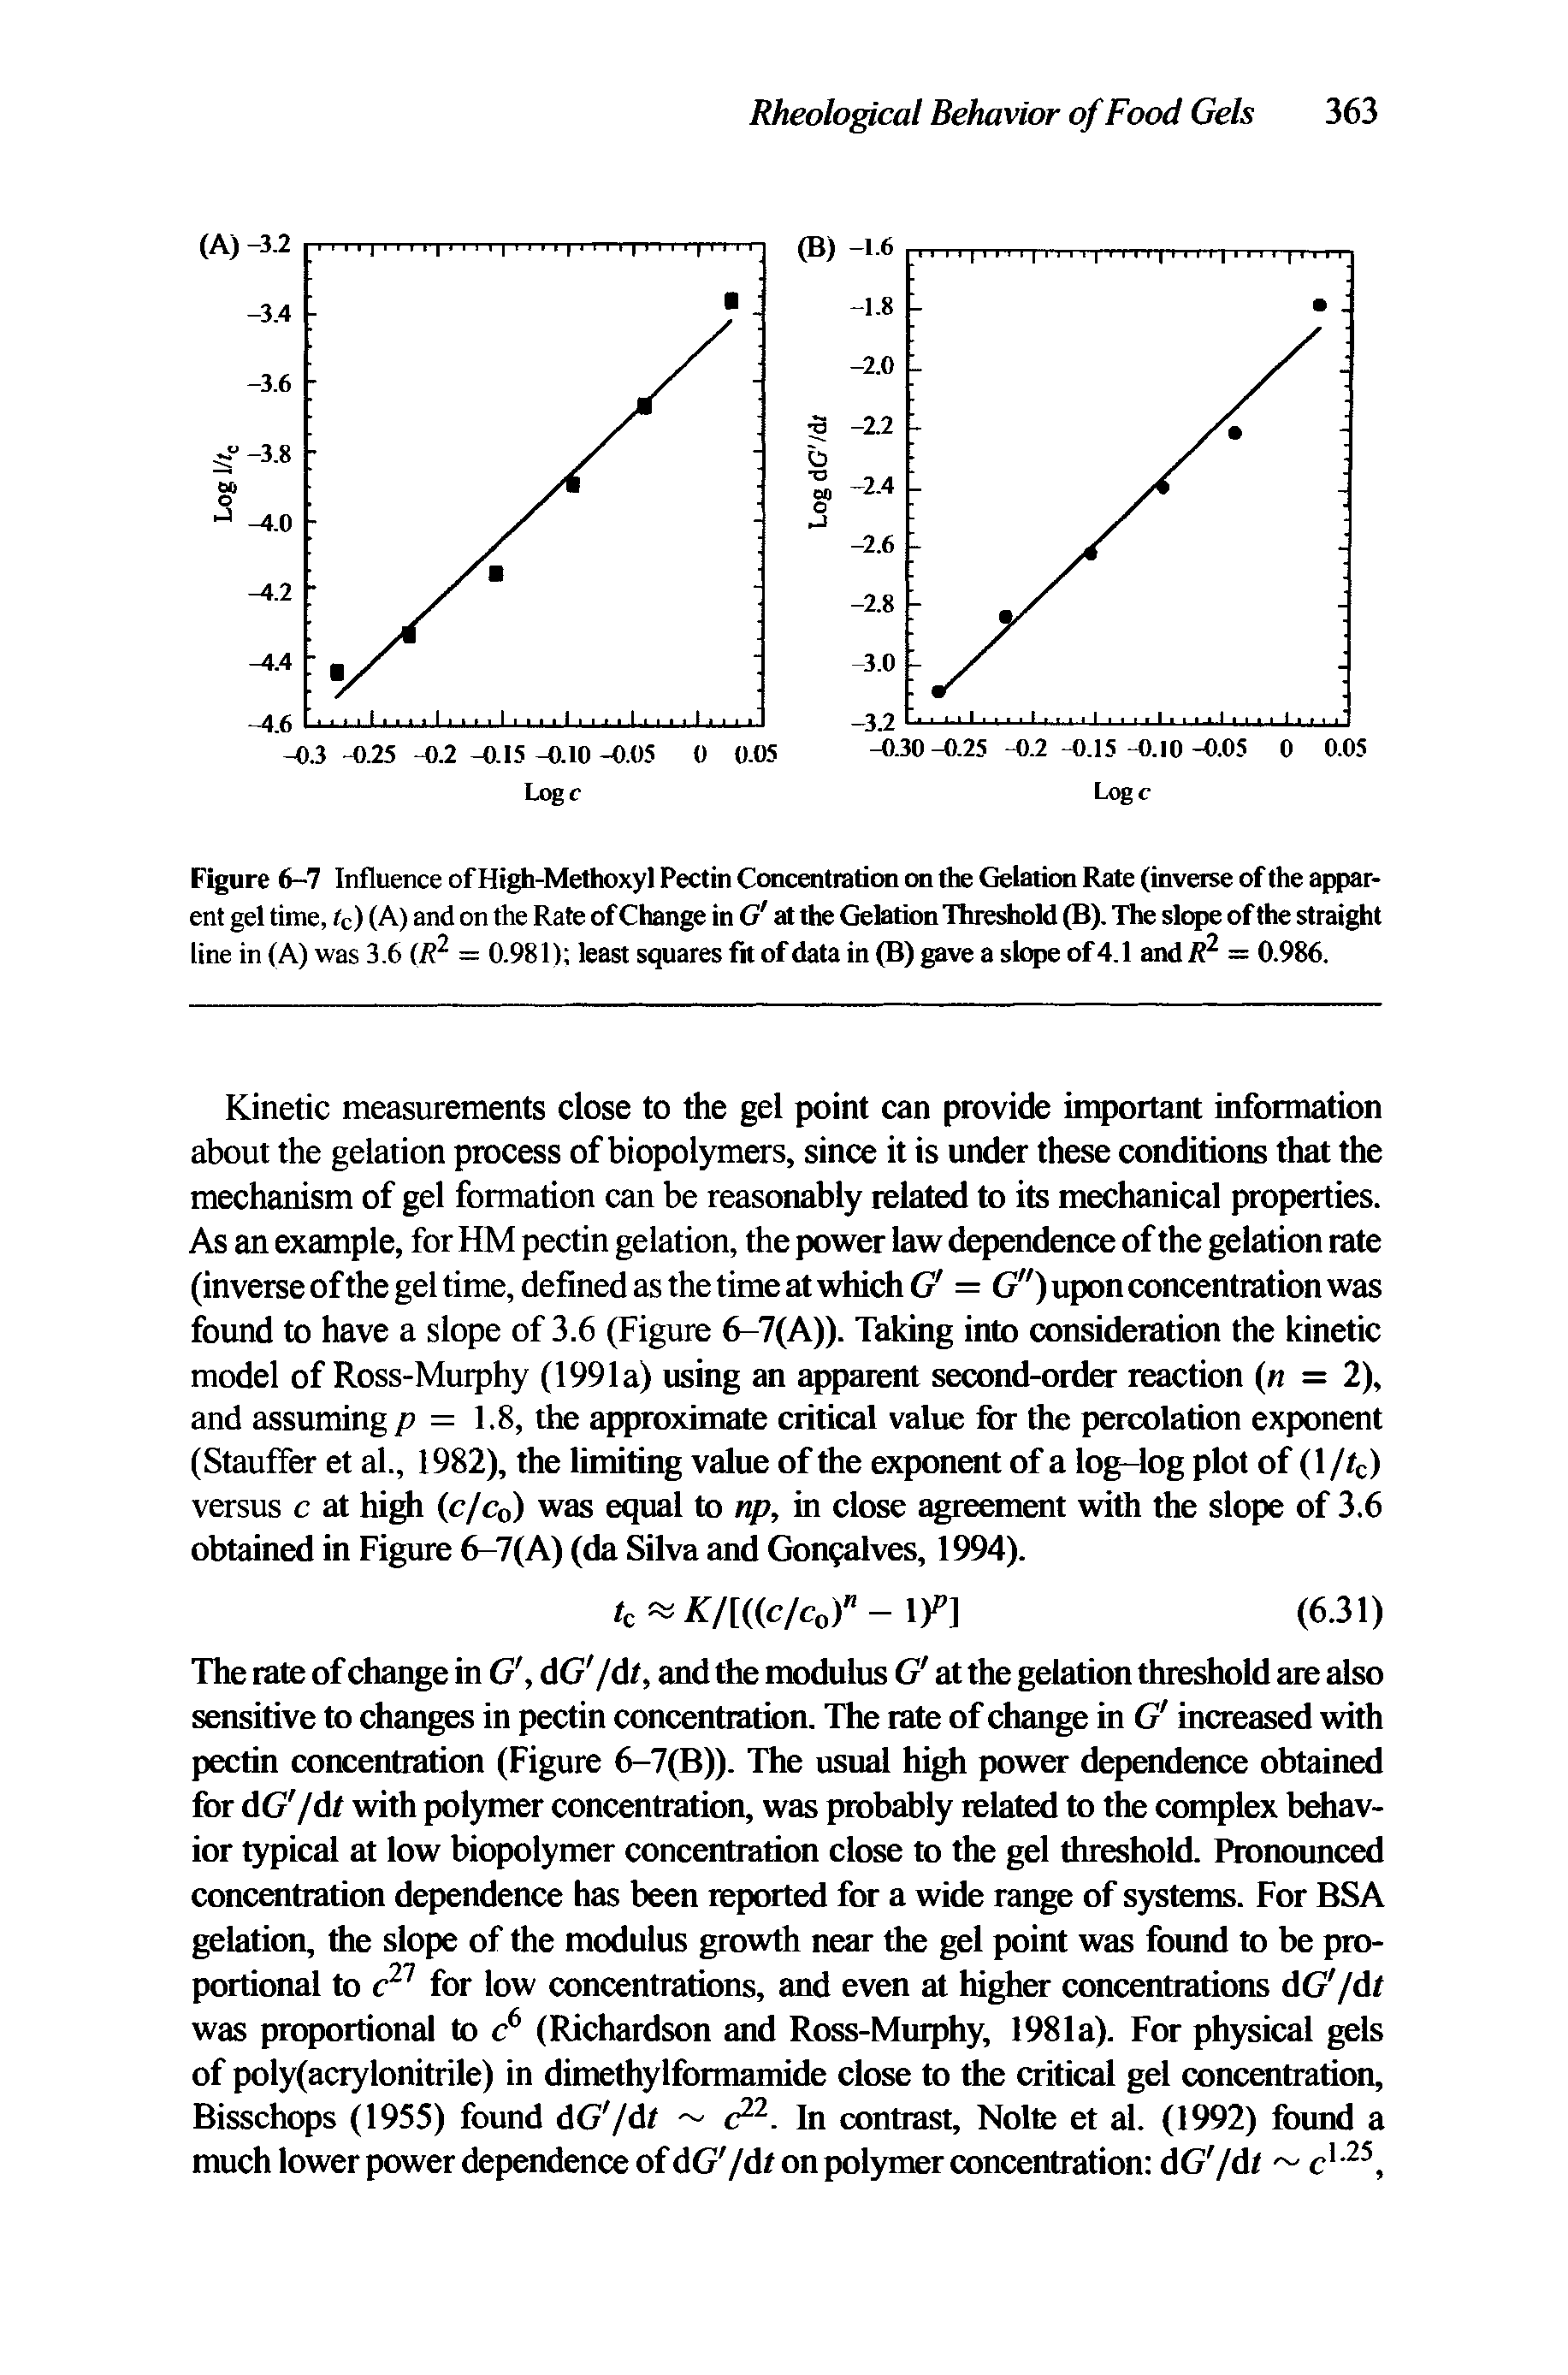 Figure 6-7 Influence of High-Methoxyl Pectin Concentration on the Gelation Rate (inverse of the apparent gel time, tc) (A) and on the Rate of Change in G at the Gelation Threshold (B), The slope of the straight line in (A) was 3.6 = 0.981) least squares fit of data in (B) gave a slope of 4.1 and = 0.986.